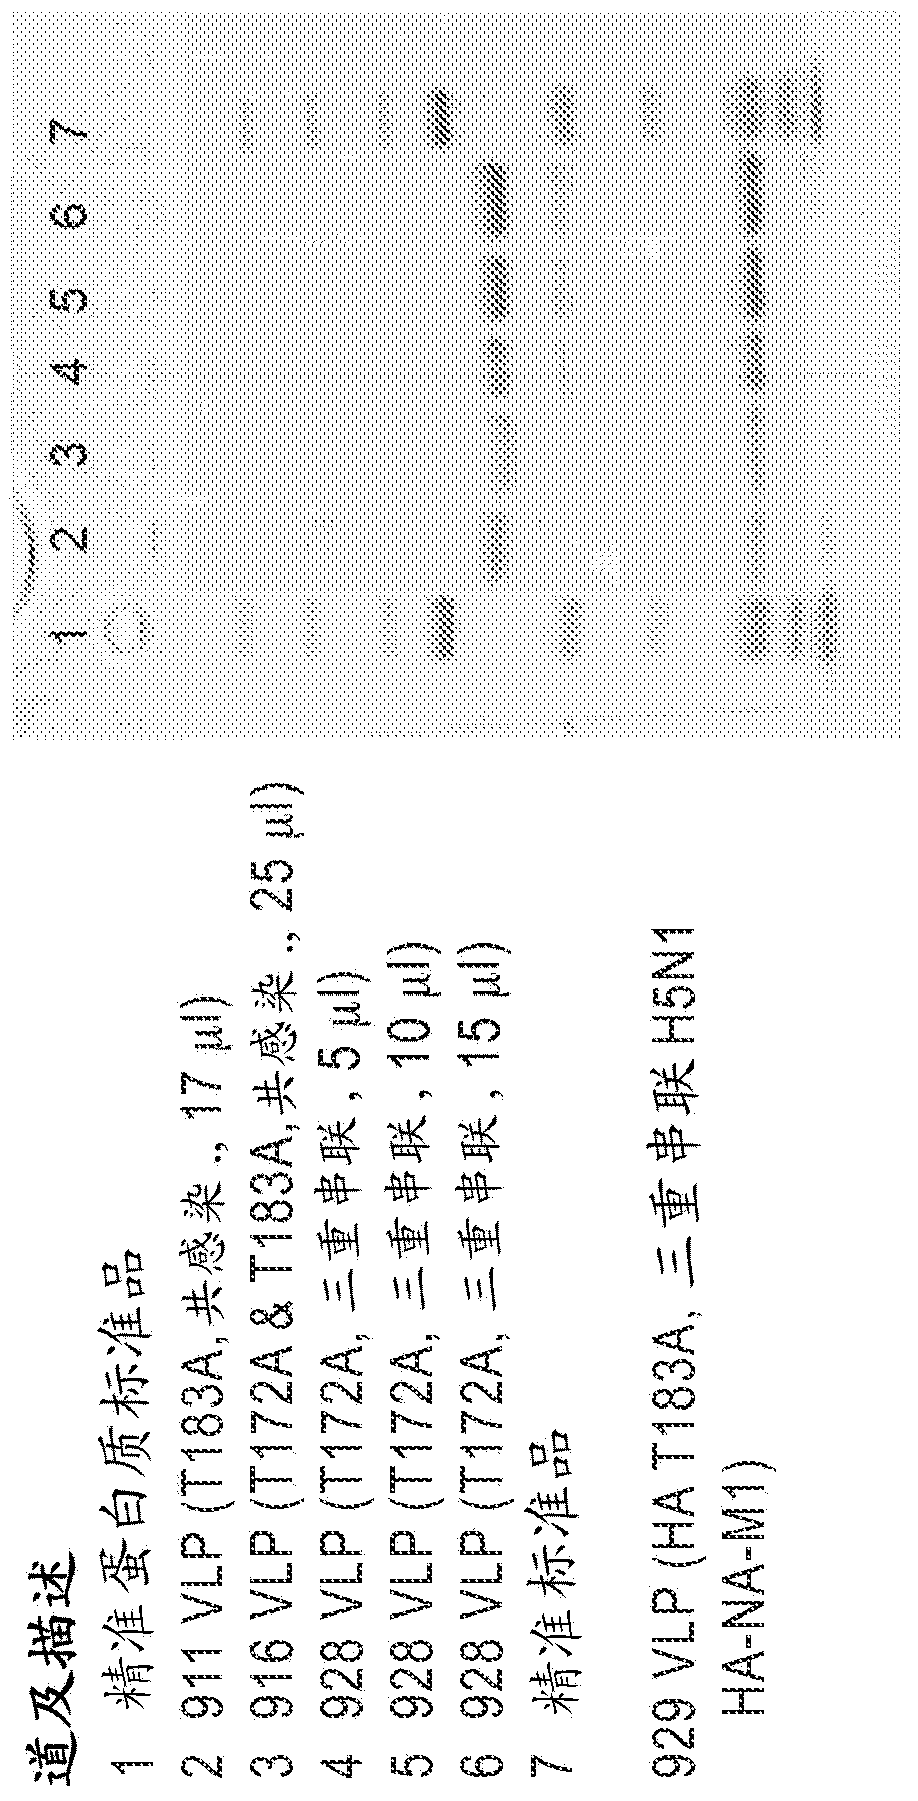 Modified influenza hemagglutinin proteins and uses thereof